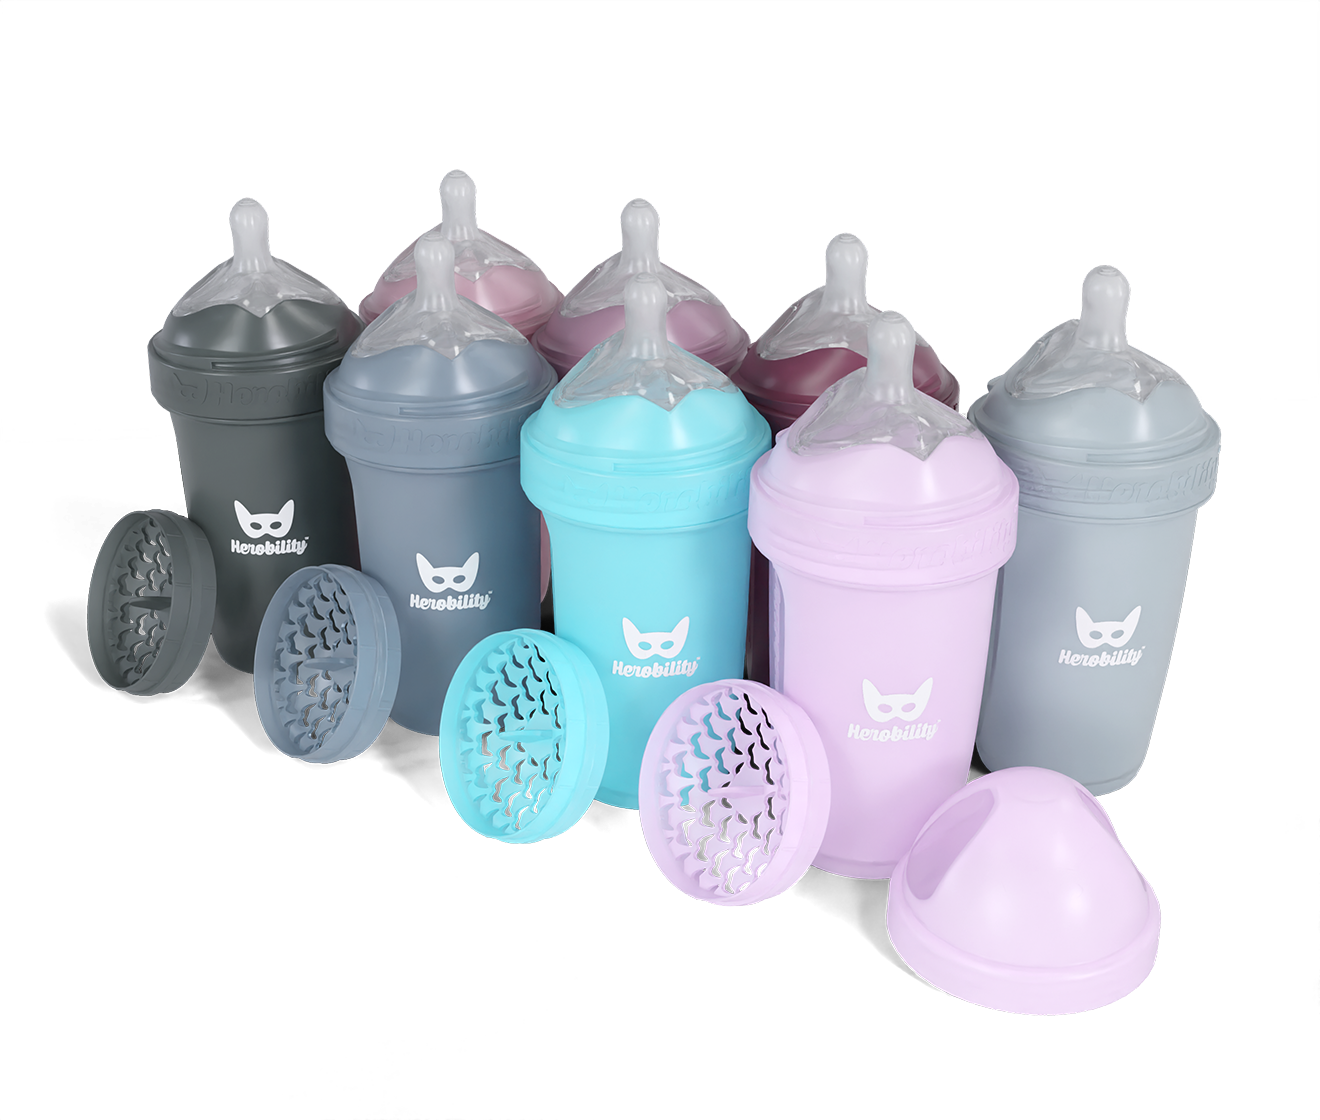 8-pack 240ml/8.5 floz baby bottles with 70% discount